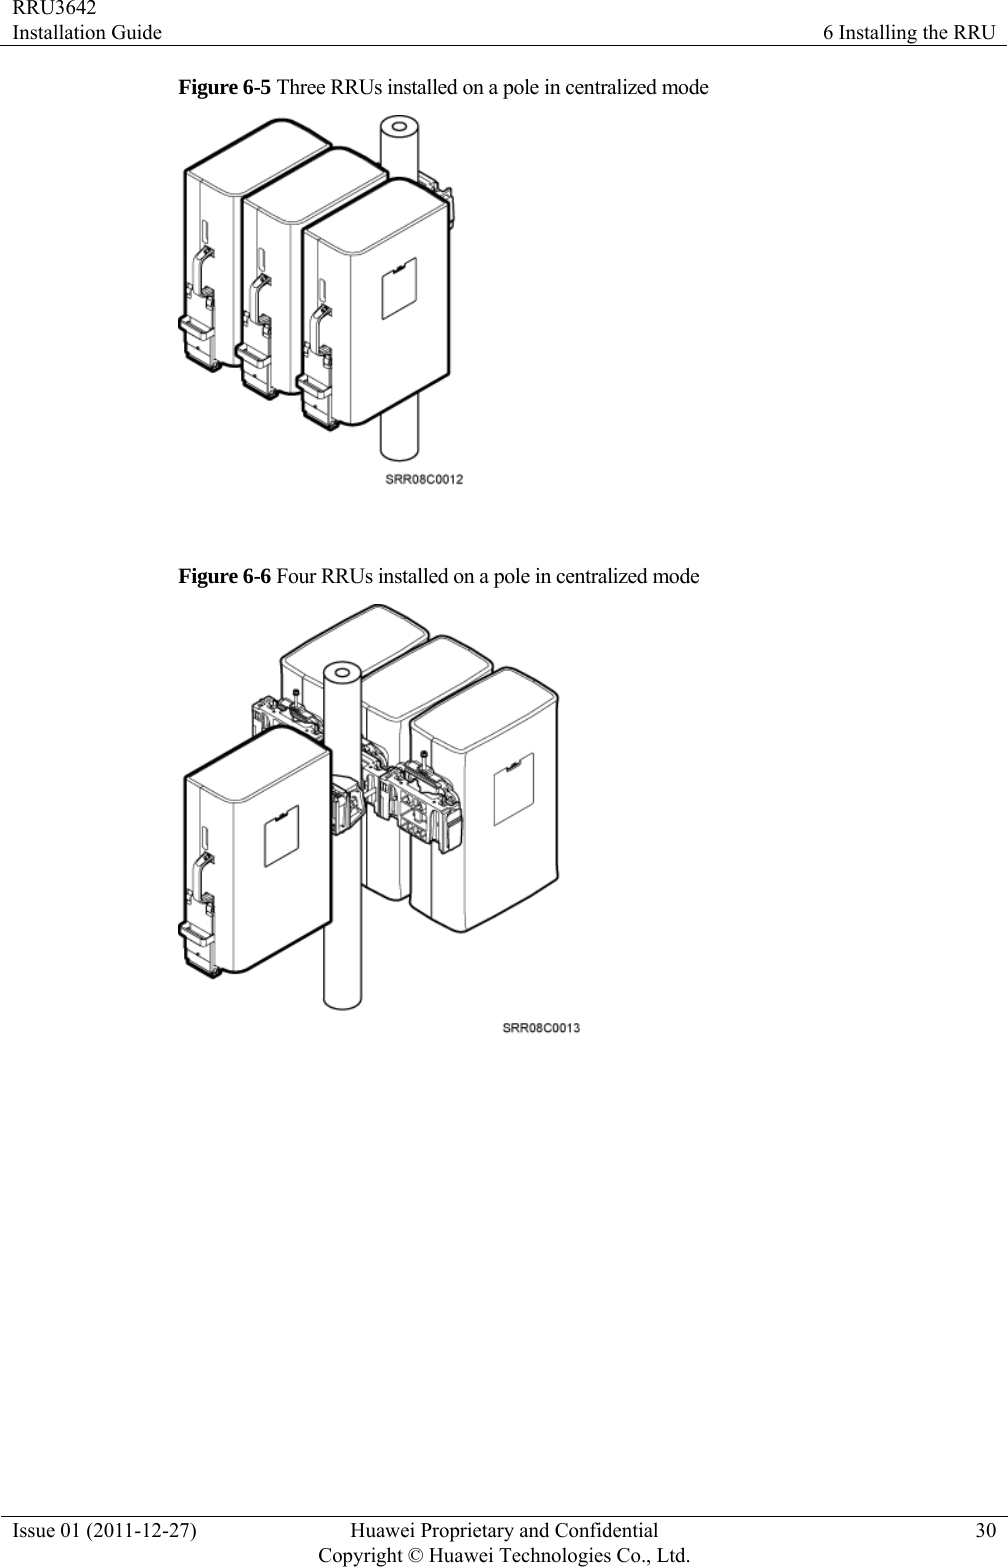 RRU3642 Installation Guide  6 Installing the RRU Issue 01 (2011-12-27)  Huawei Proprietary and Confidential         Copyright © Huawei Technologies Co., Ltd.30 Figure 6-5 Three RRUs installed on a pole in centralized mode   Figure 6-6 Four RRUs installed on a pole in centralized mode   